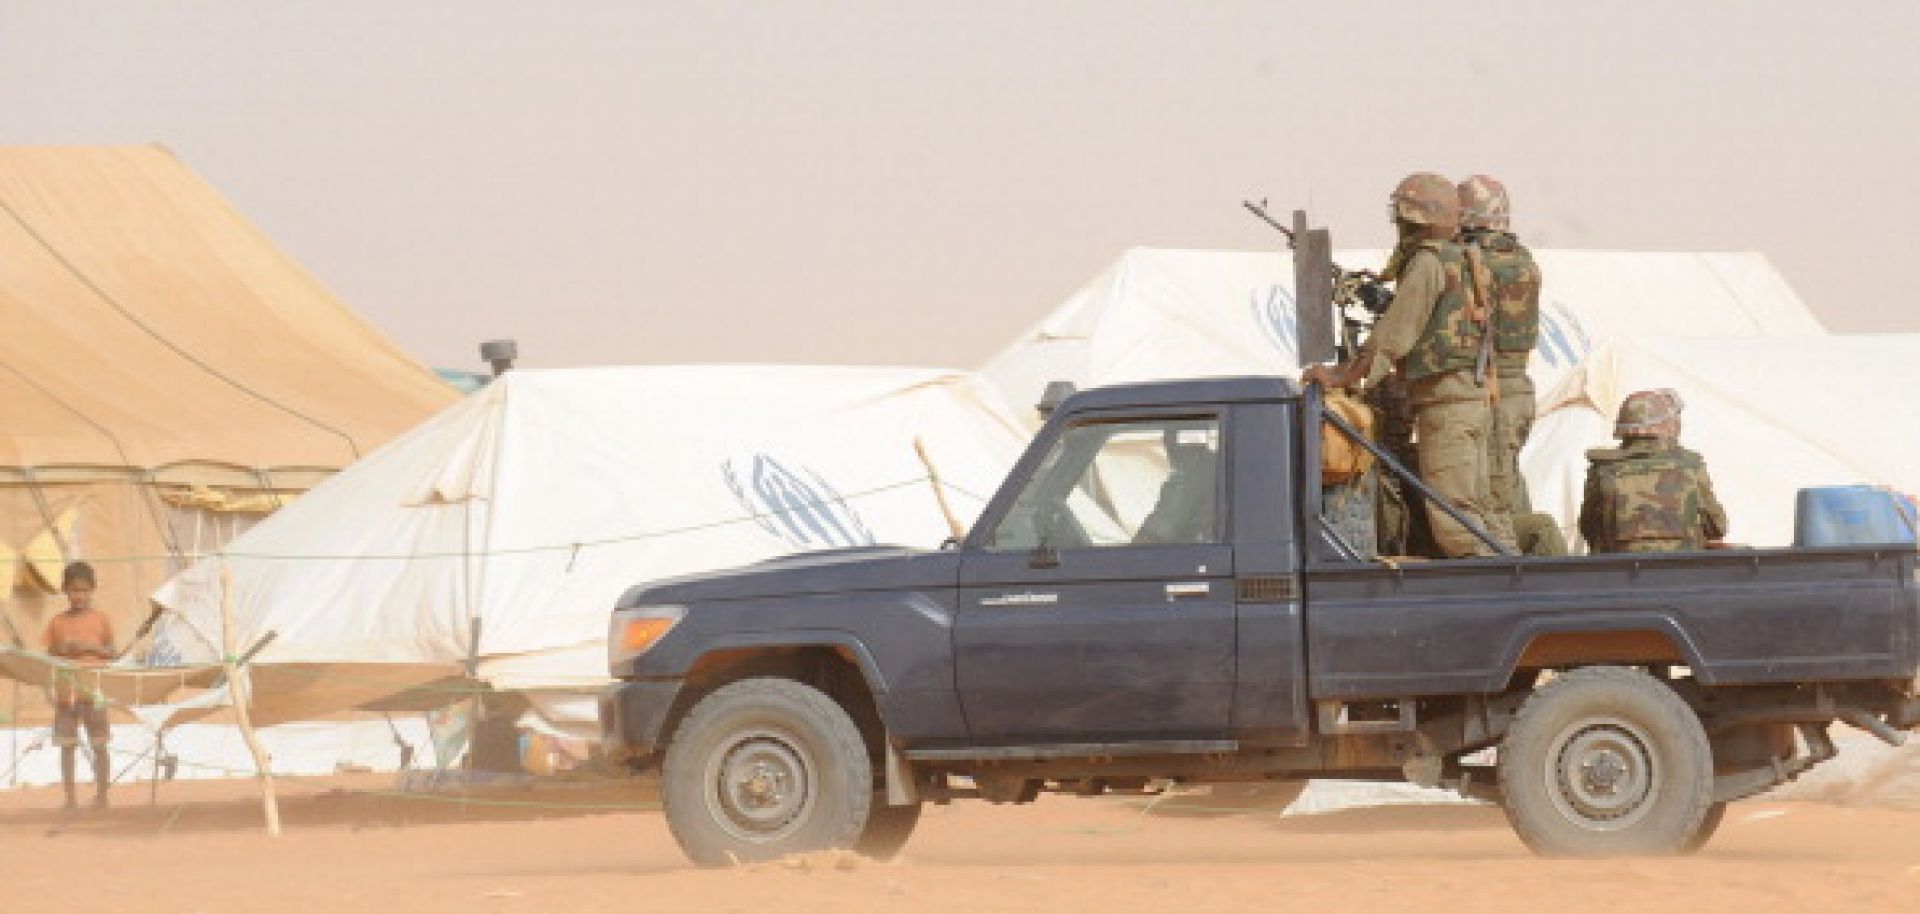 Signs of a Possible Intervention in Mali